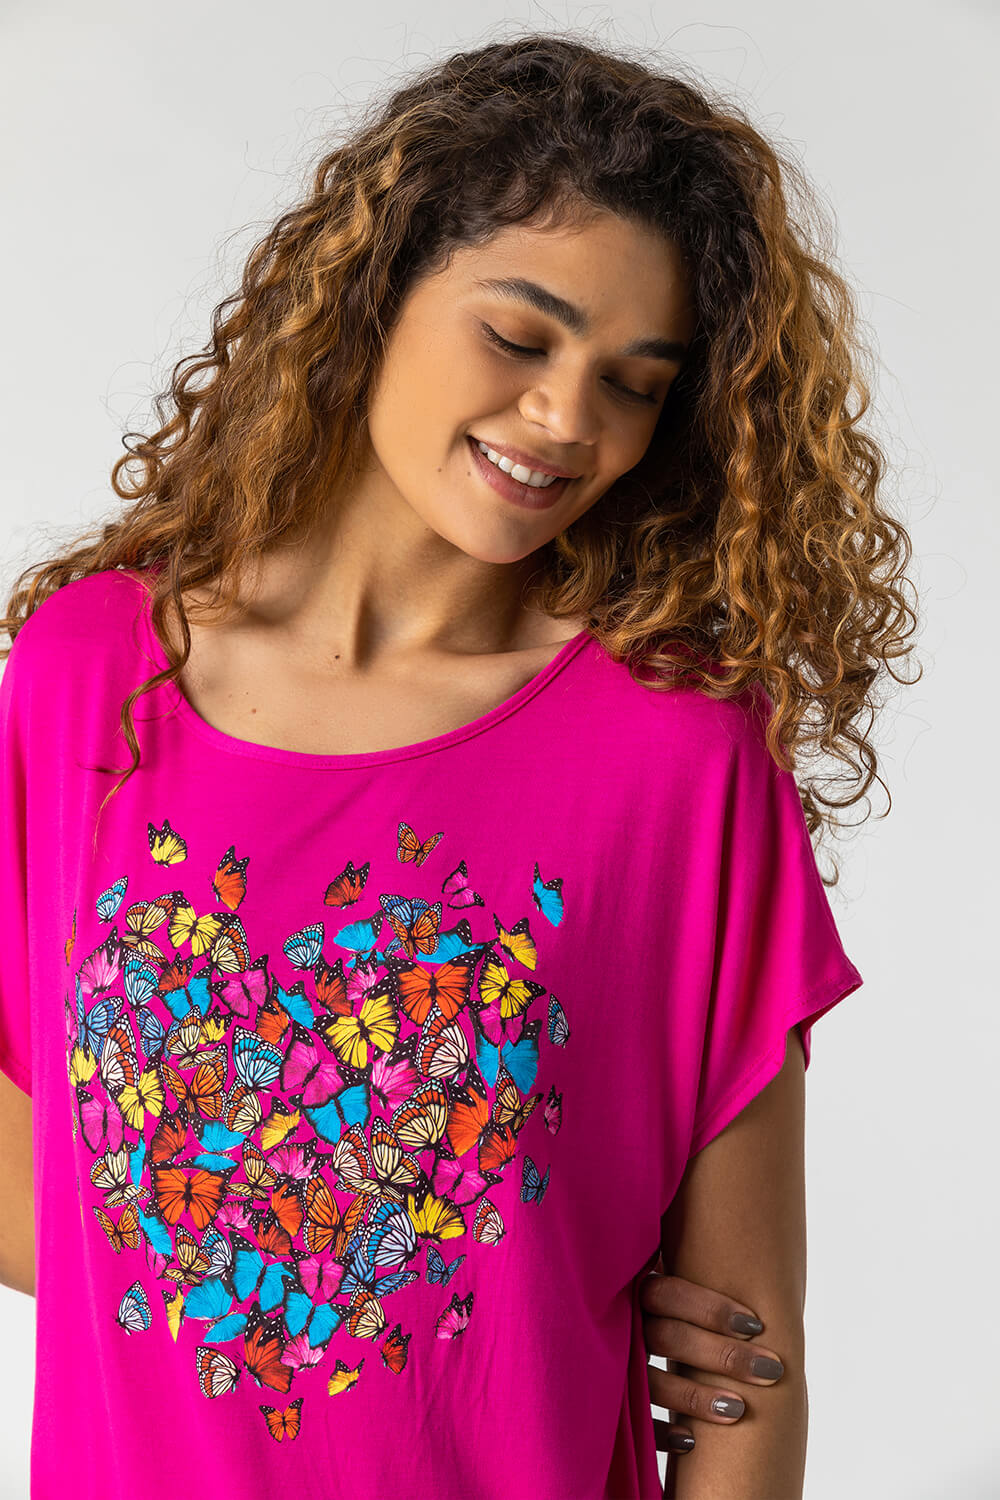 PINK Butterfly Heart Print T-Shirt, Image 4 of 5